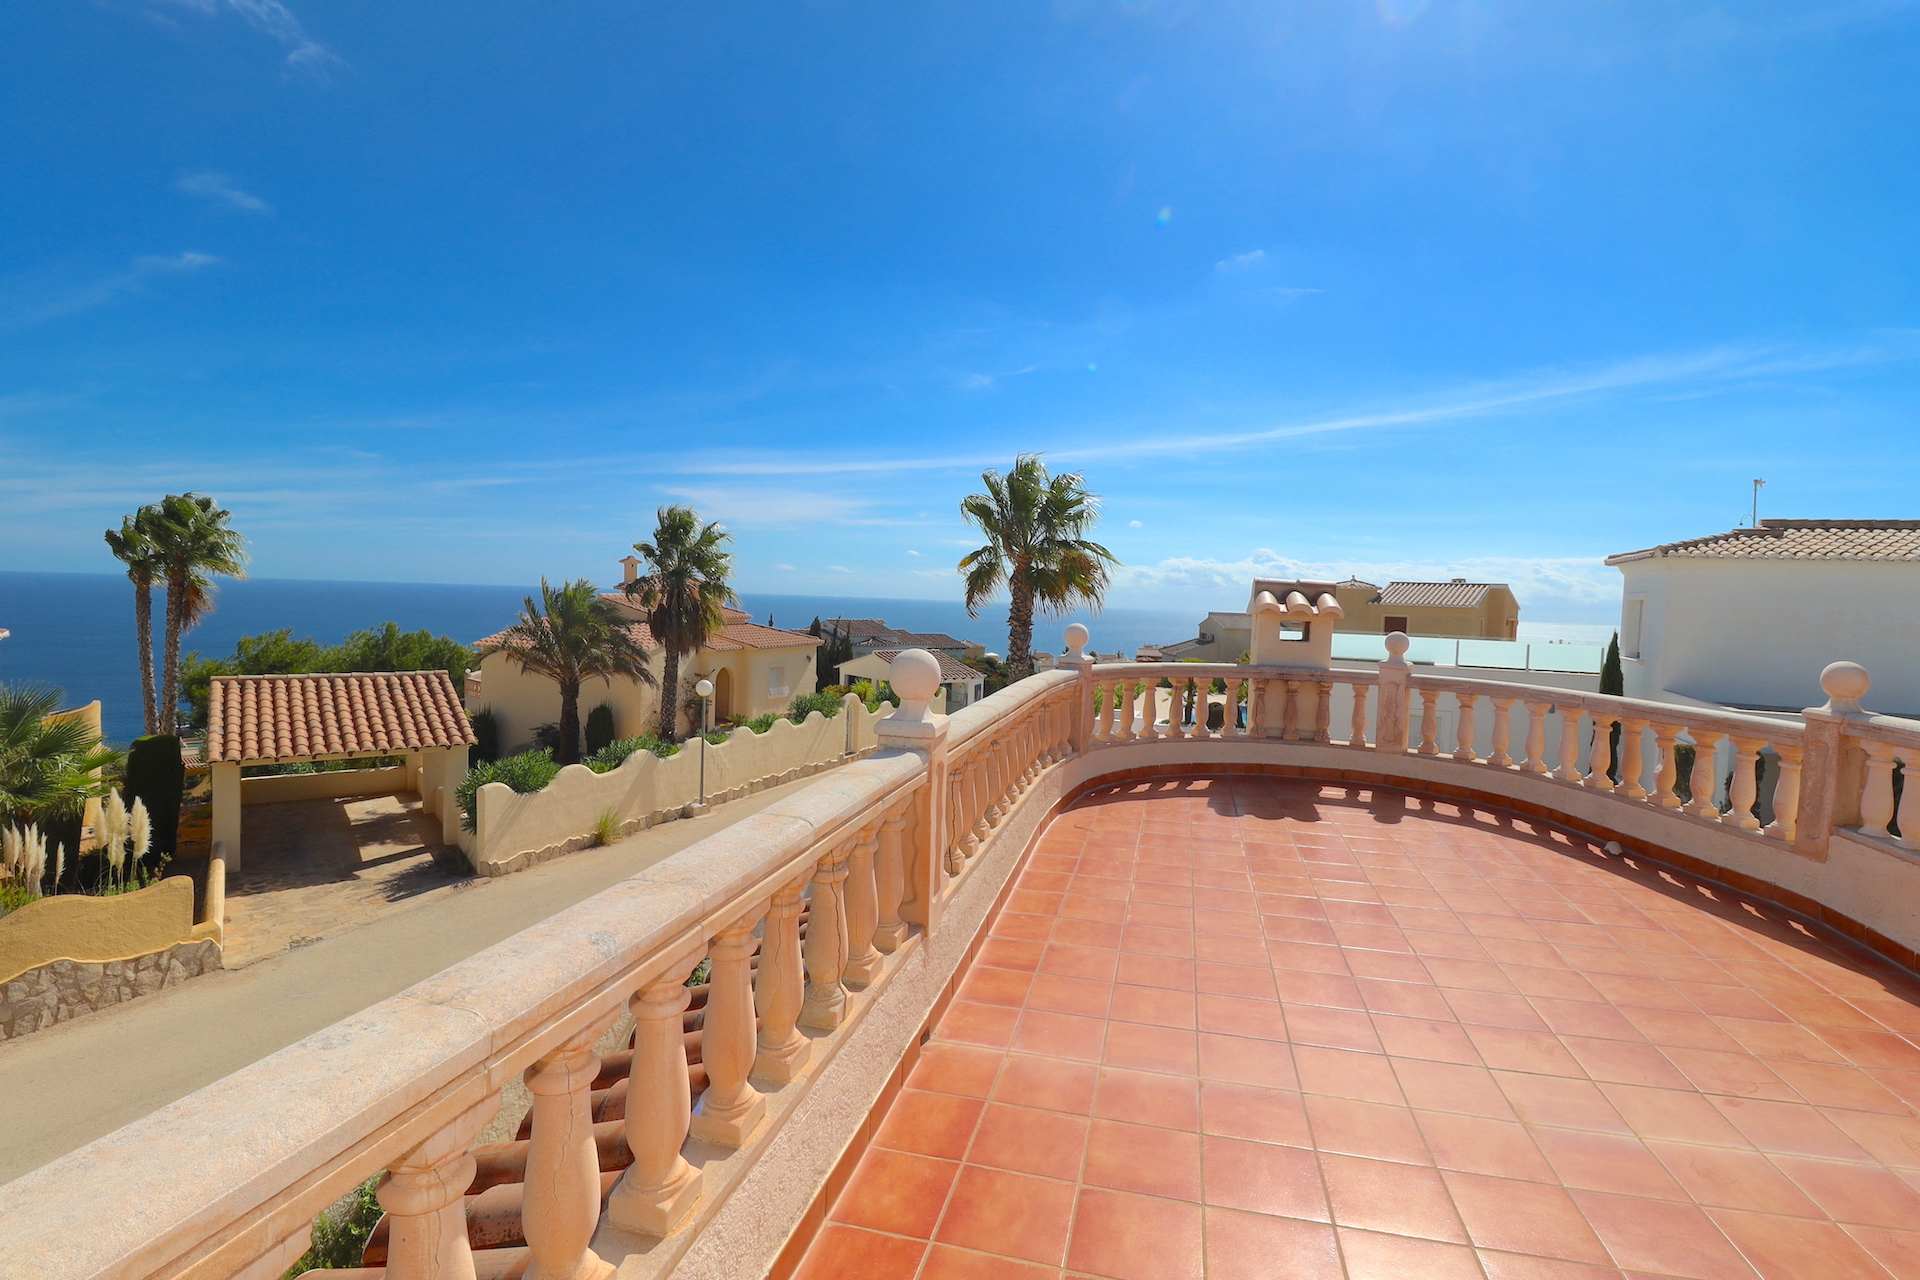 Stunning Villa with 5 Bedrooms and sea views